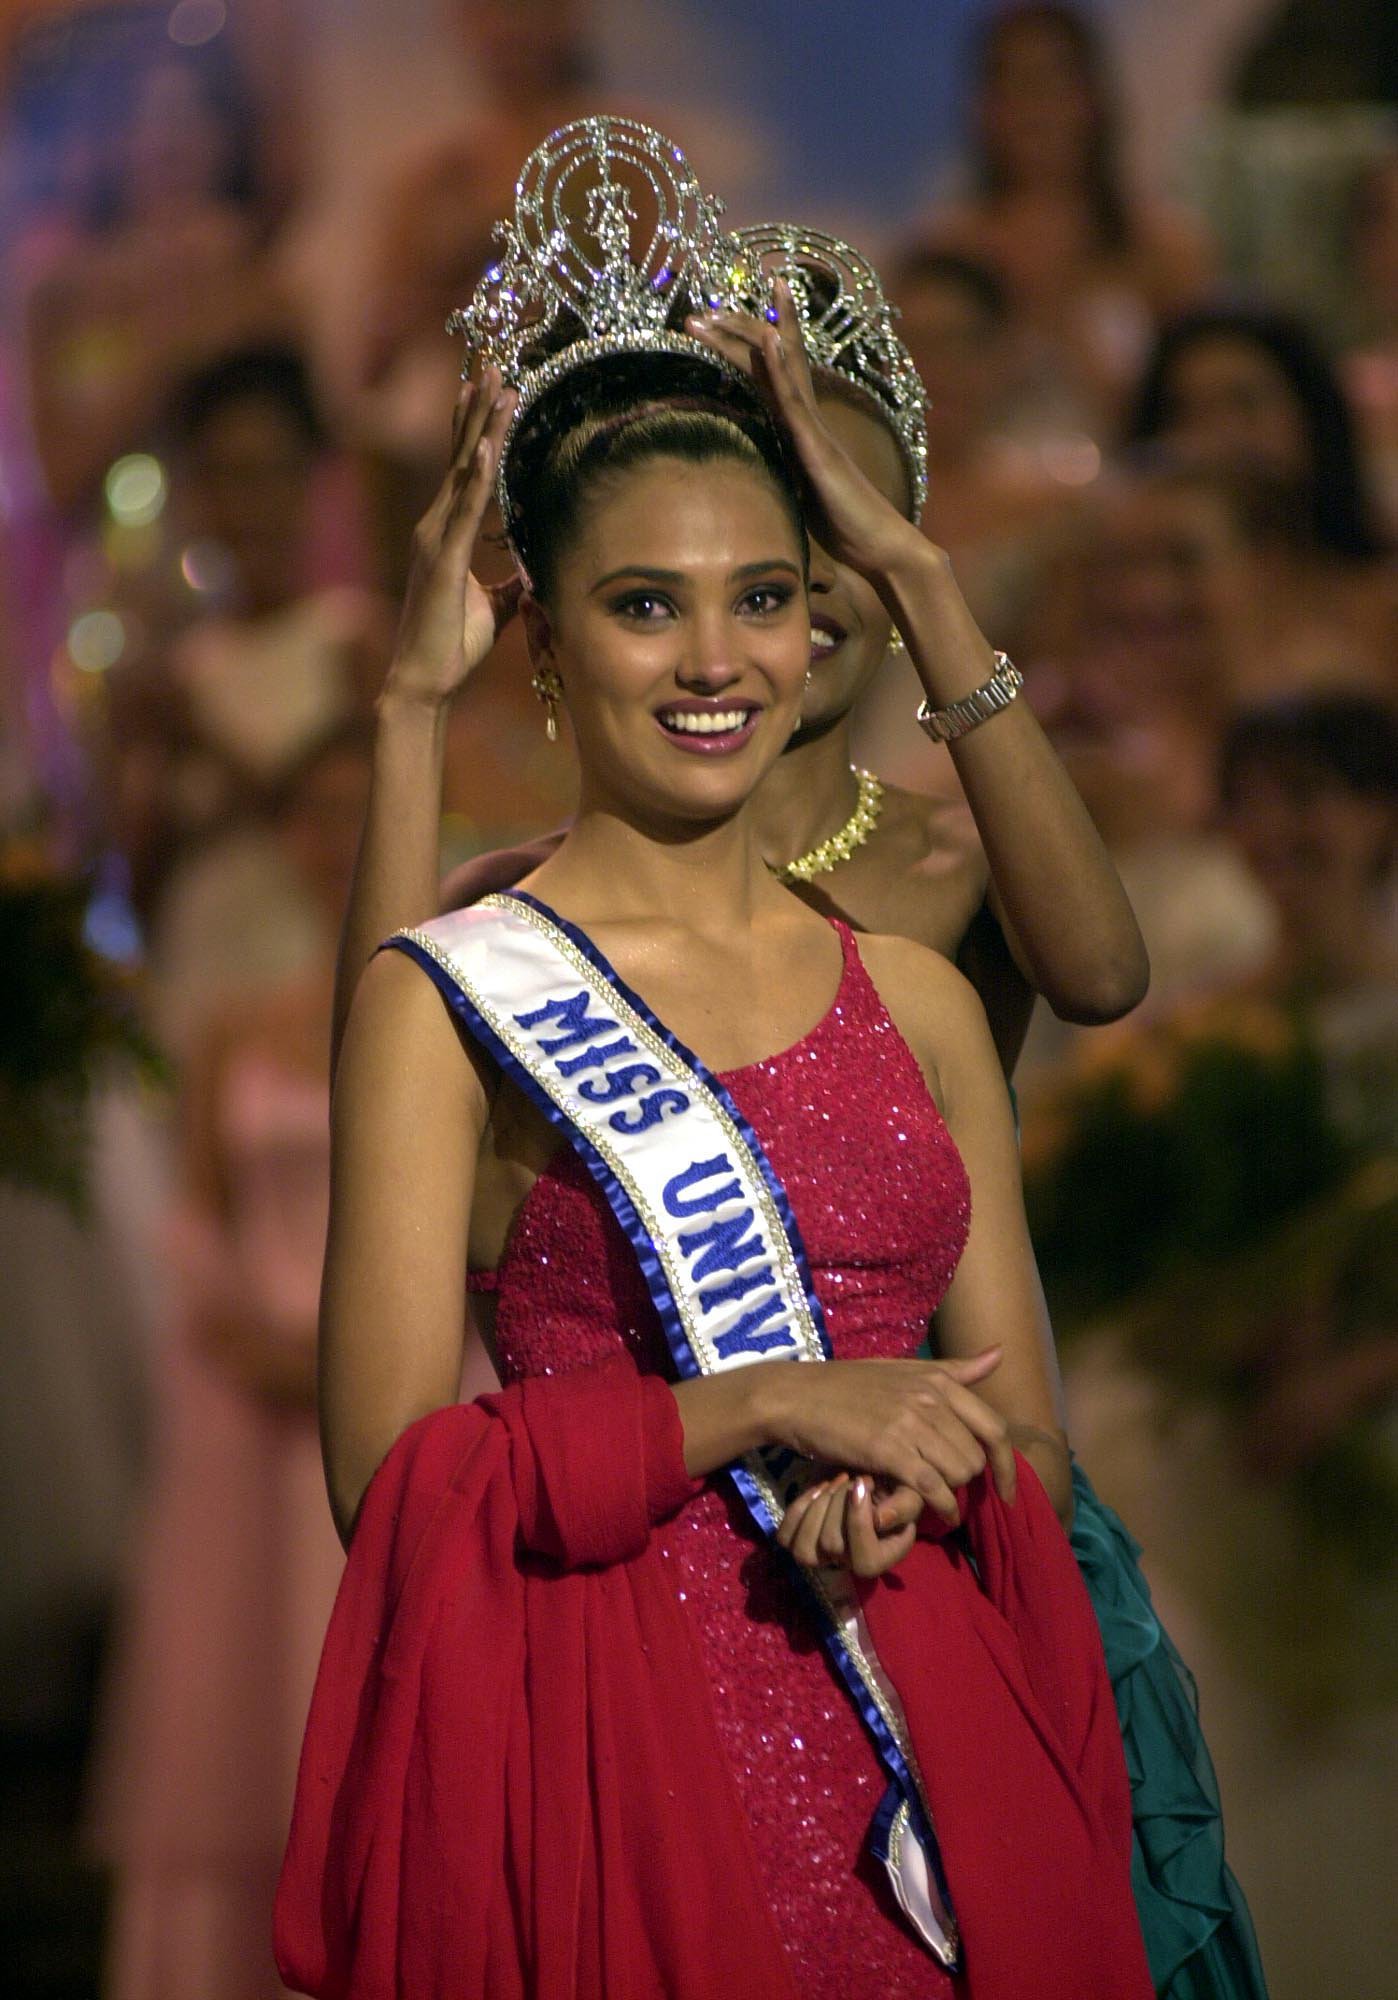 8 Reasons Why Beauty Pageants Need To Just Stop